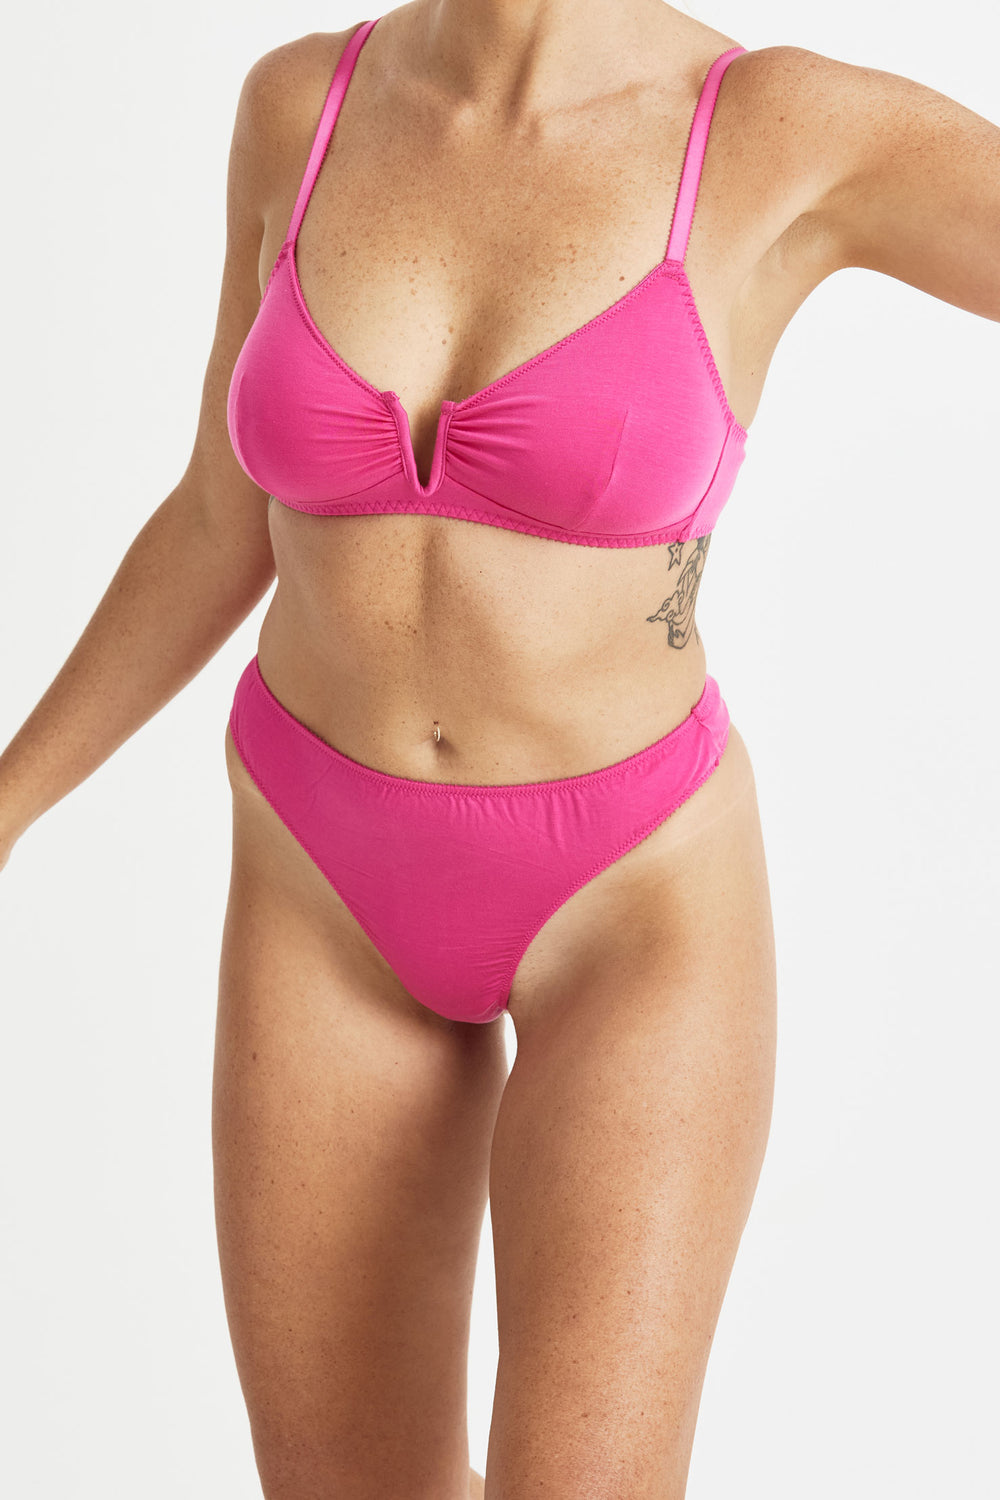 Videris Lingerie thong in hot pink TENCEL™ a comfortable mid-rise style that elongates the legs